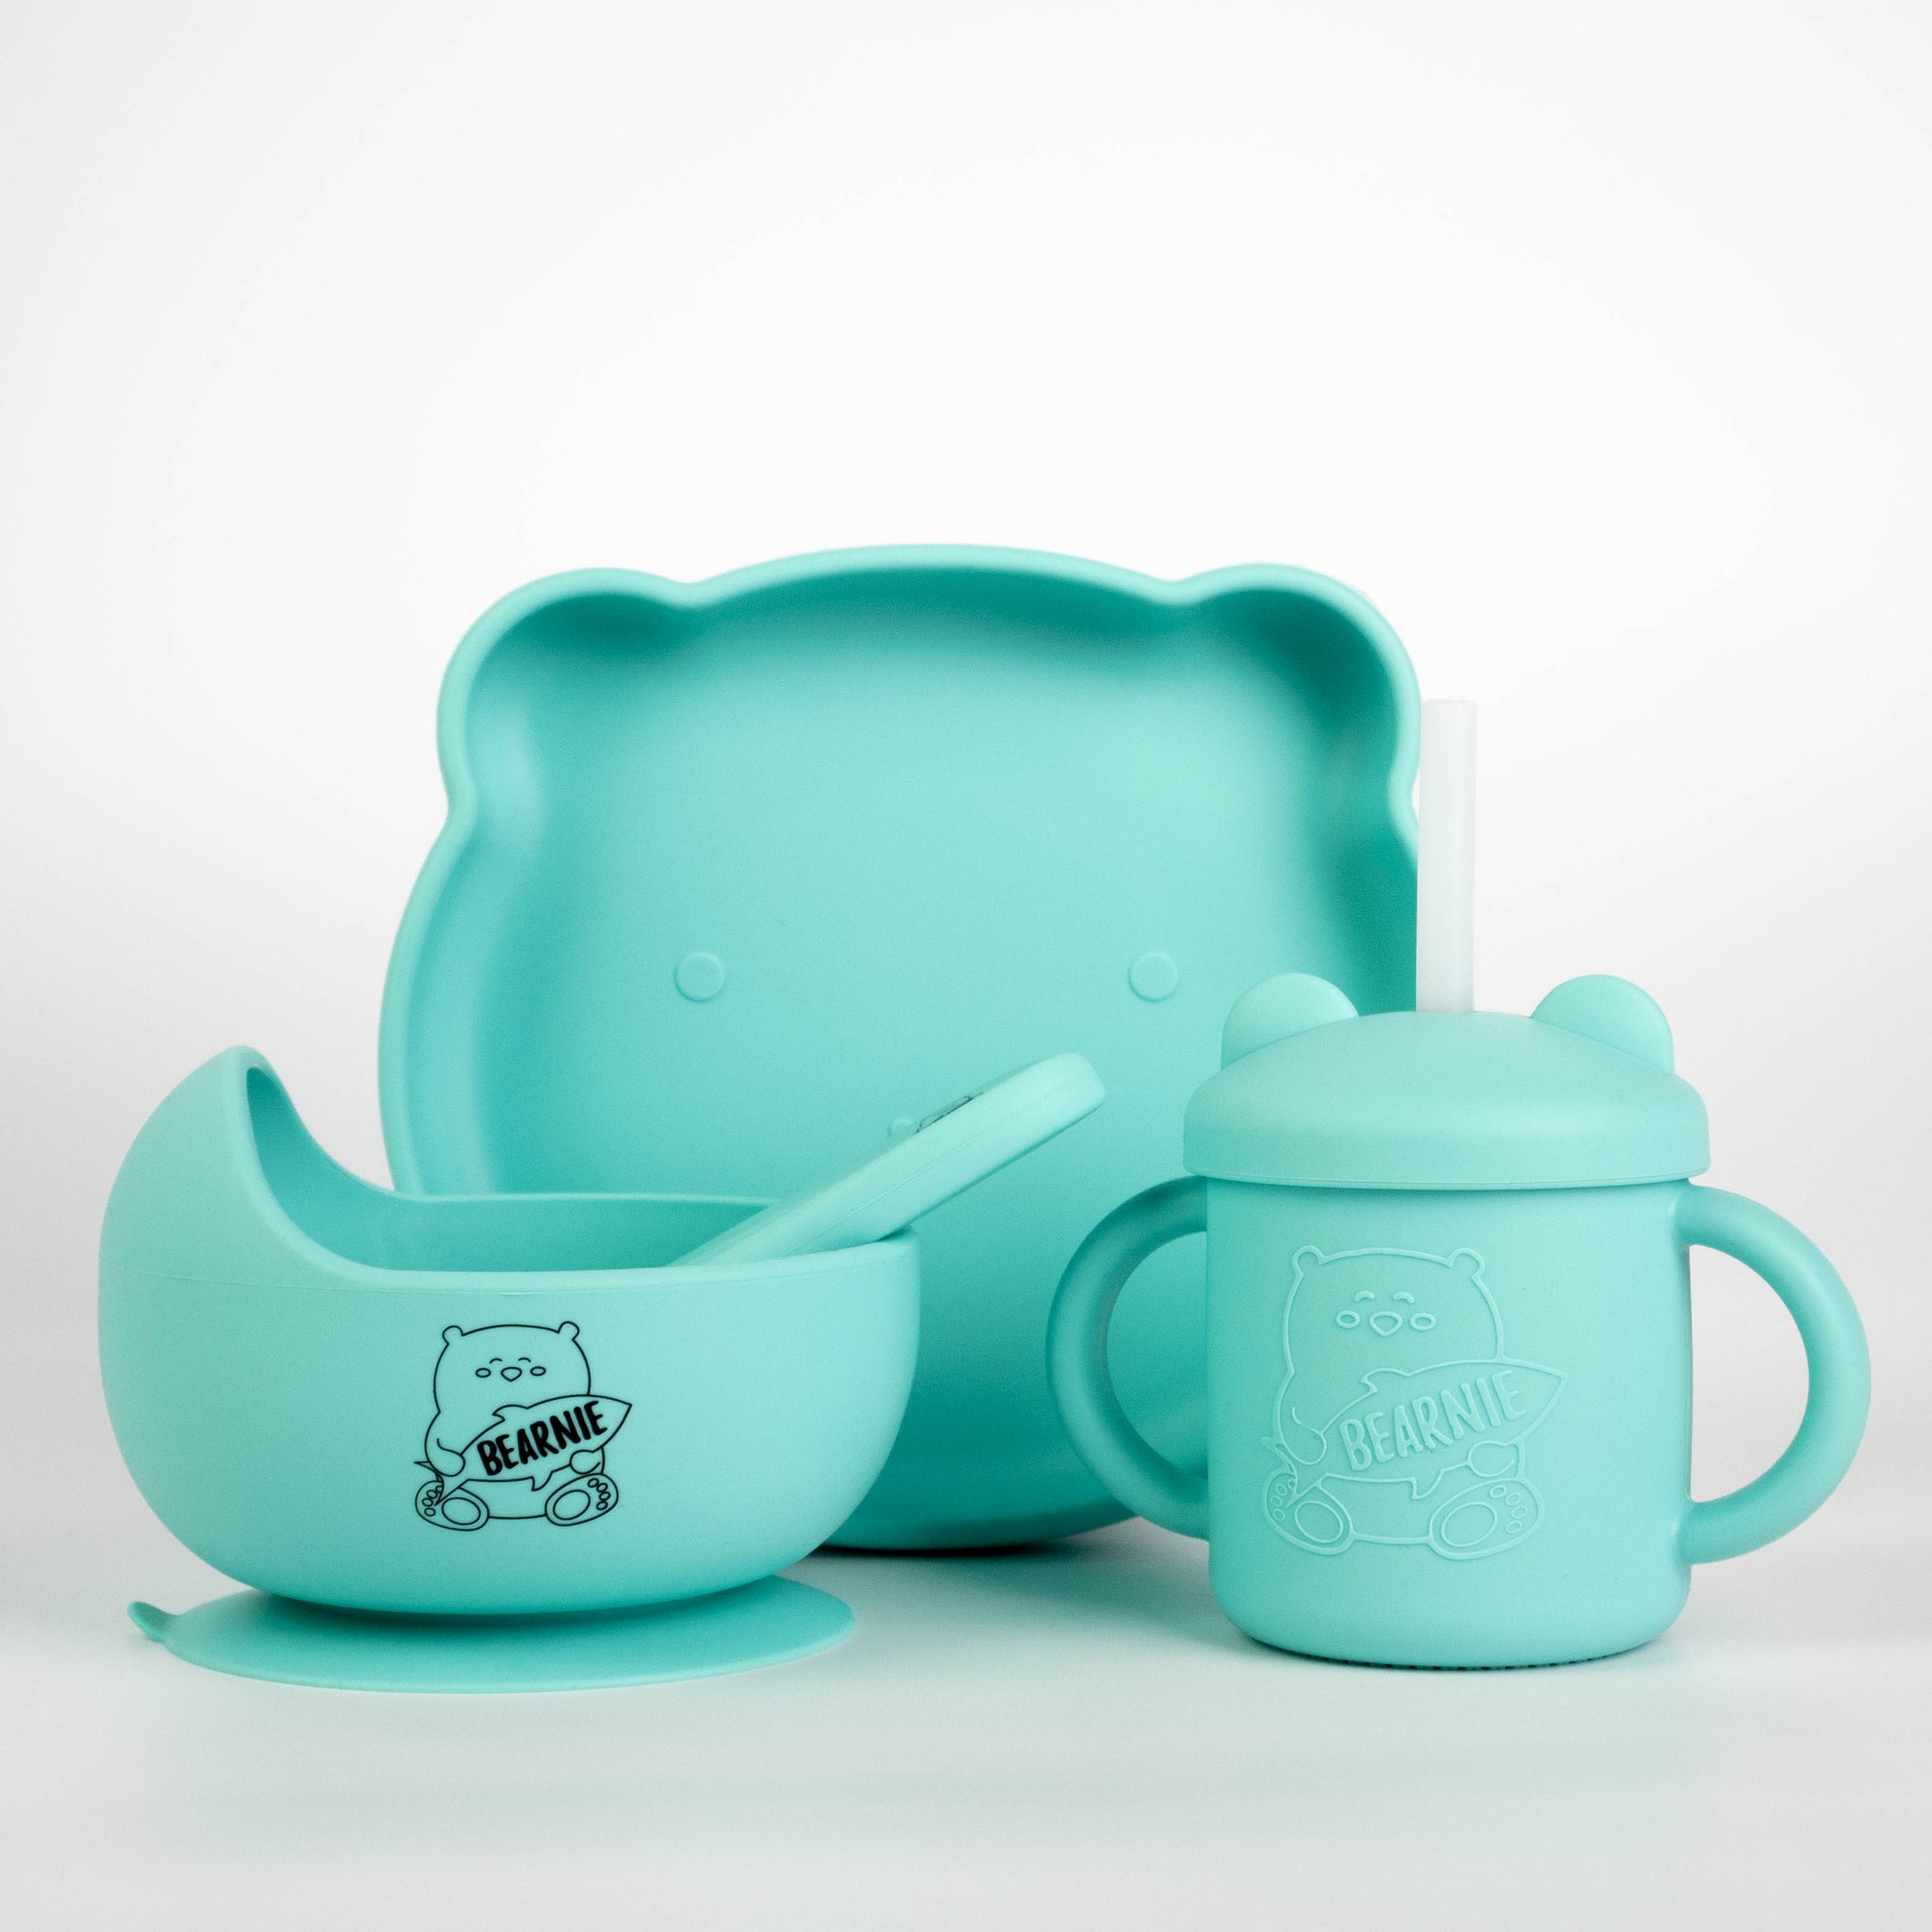 [Bundle of 3] Grow with Bearnie Matching Bowl, Plate & Cup